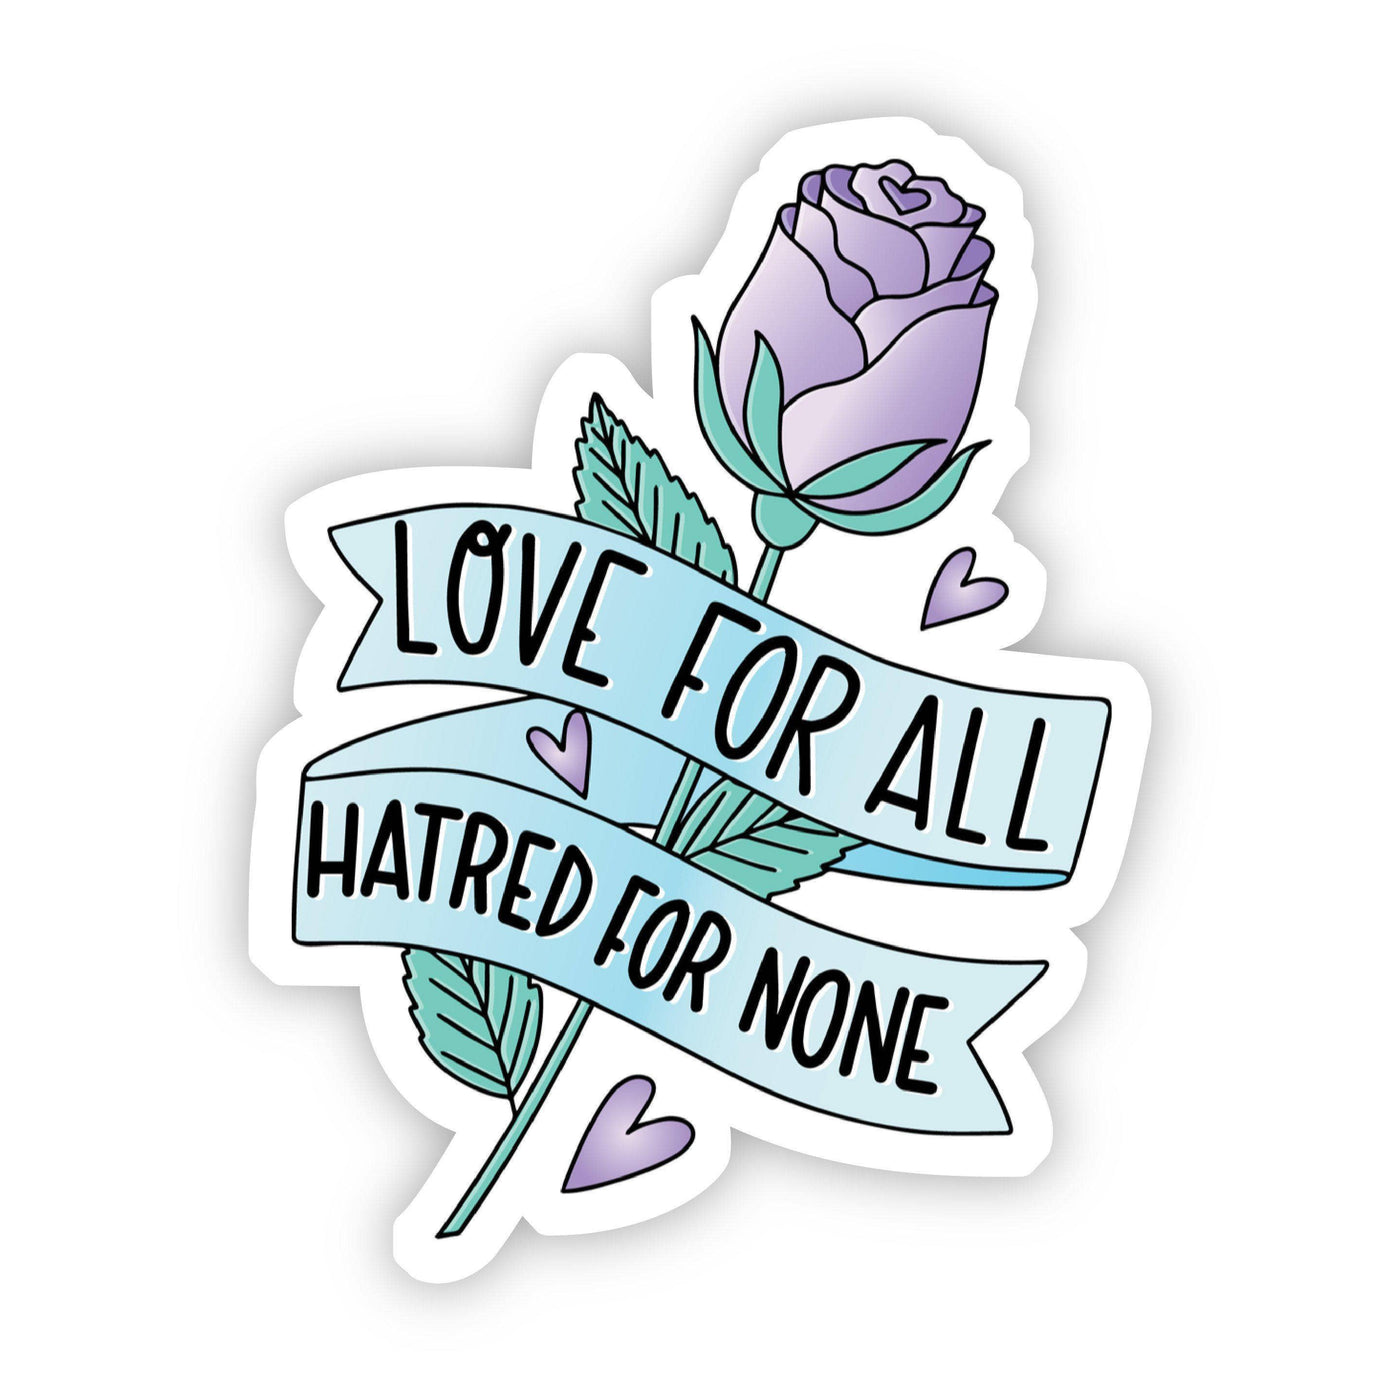 Love For All Hatred For None Purple Rose Sticker